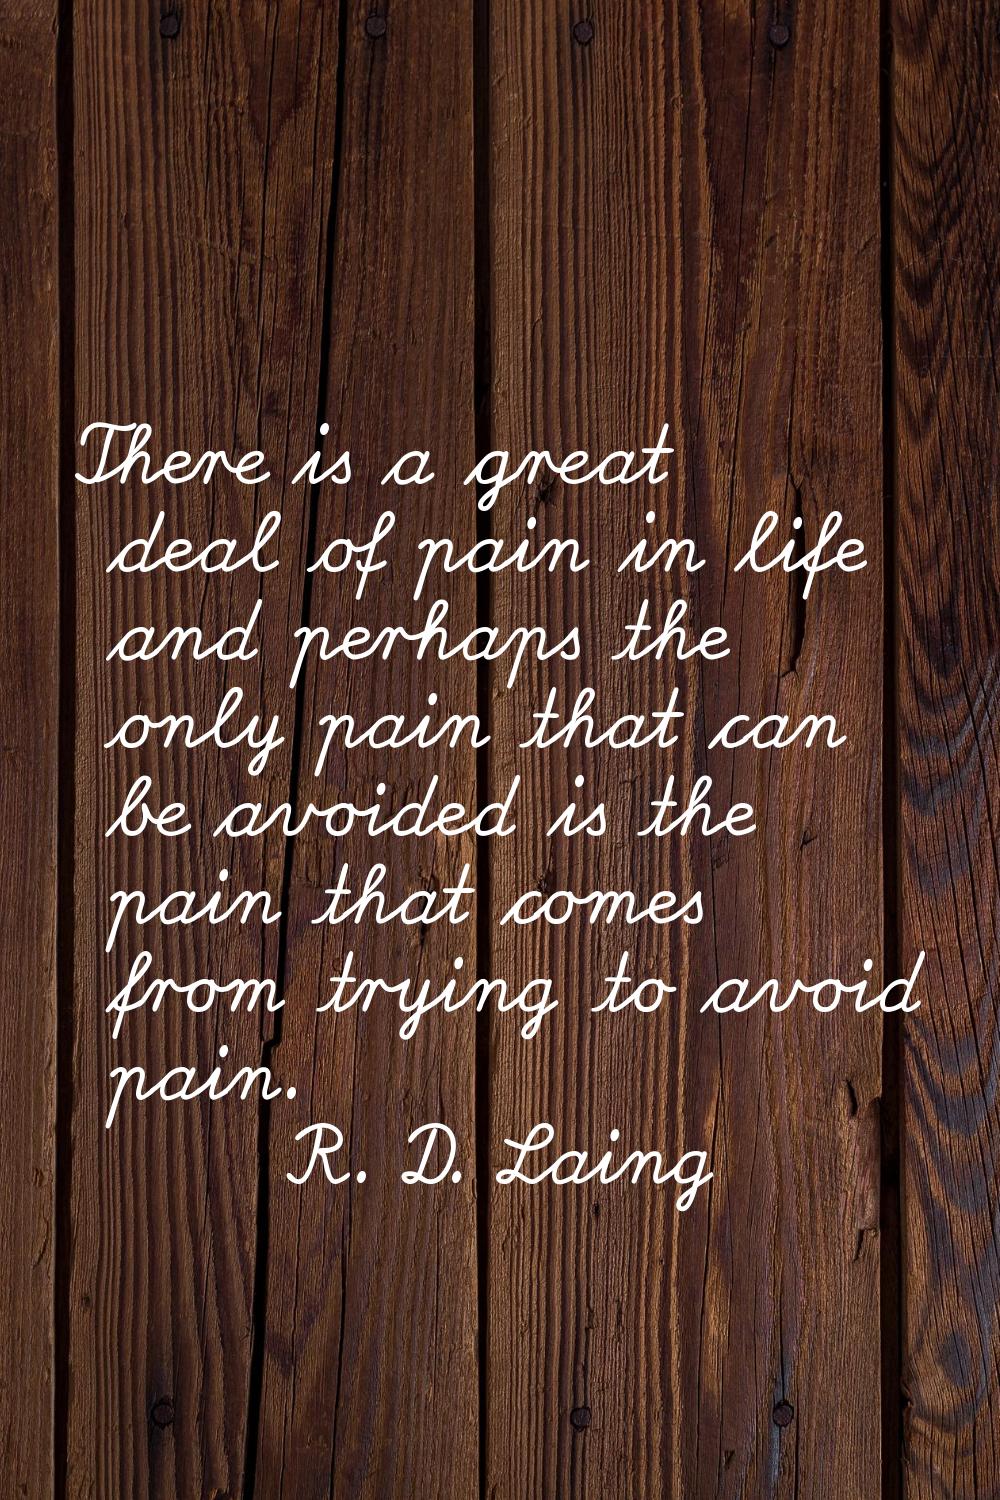 There is a great deal of pain in life and perhaps the only pain that can be avoided is the pain tha